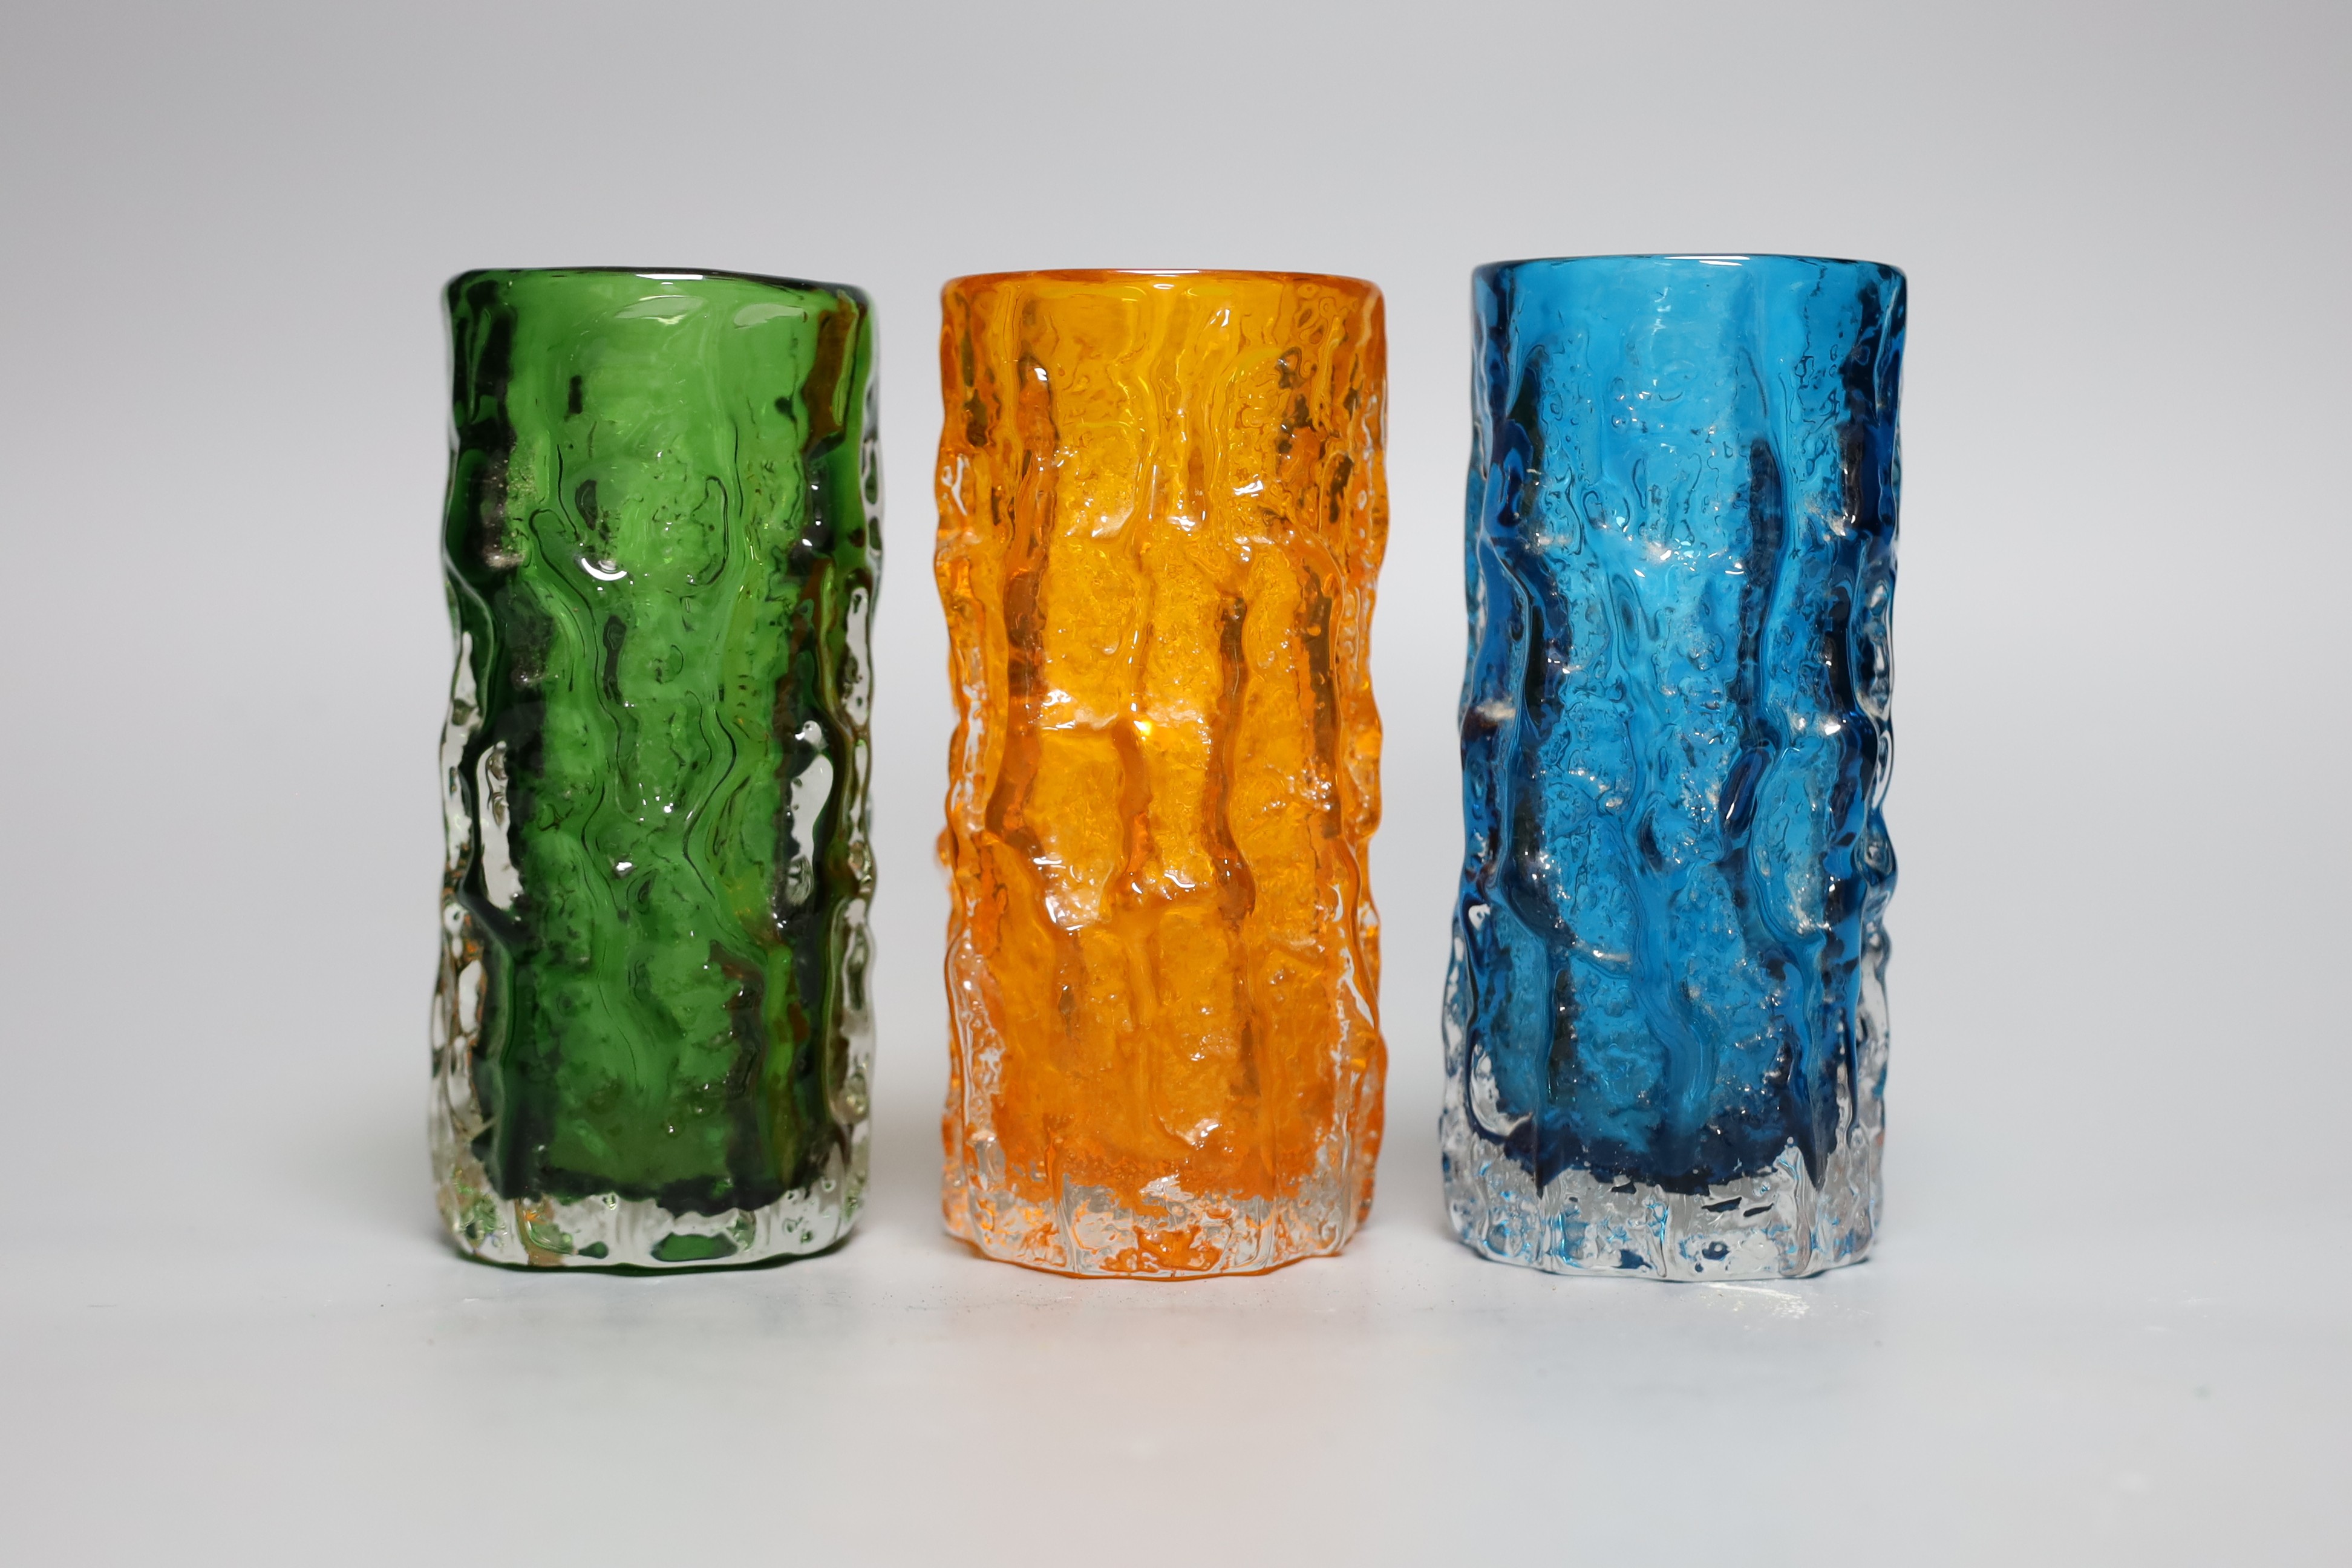 Three Whitefriars 'bark' cylinder vases, model 9689 designed by Geoffrey Baxter, kingfisher blue, tangerine and green glass, each 15cm high.